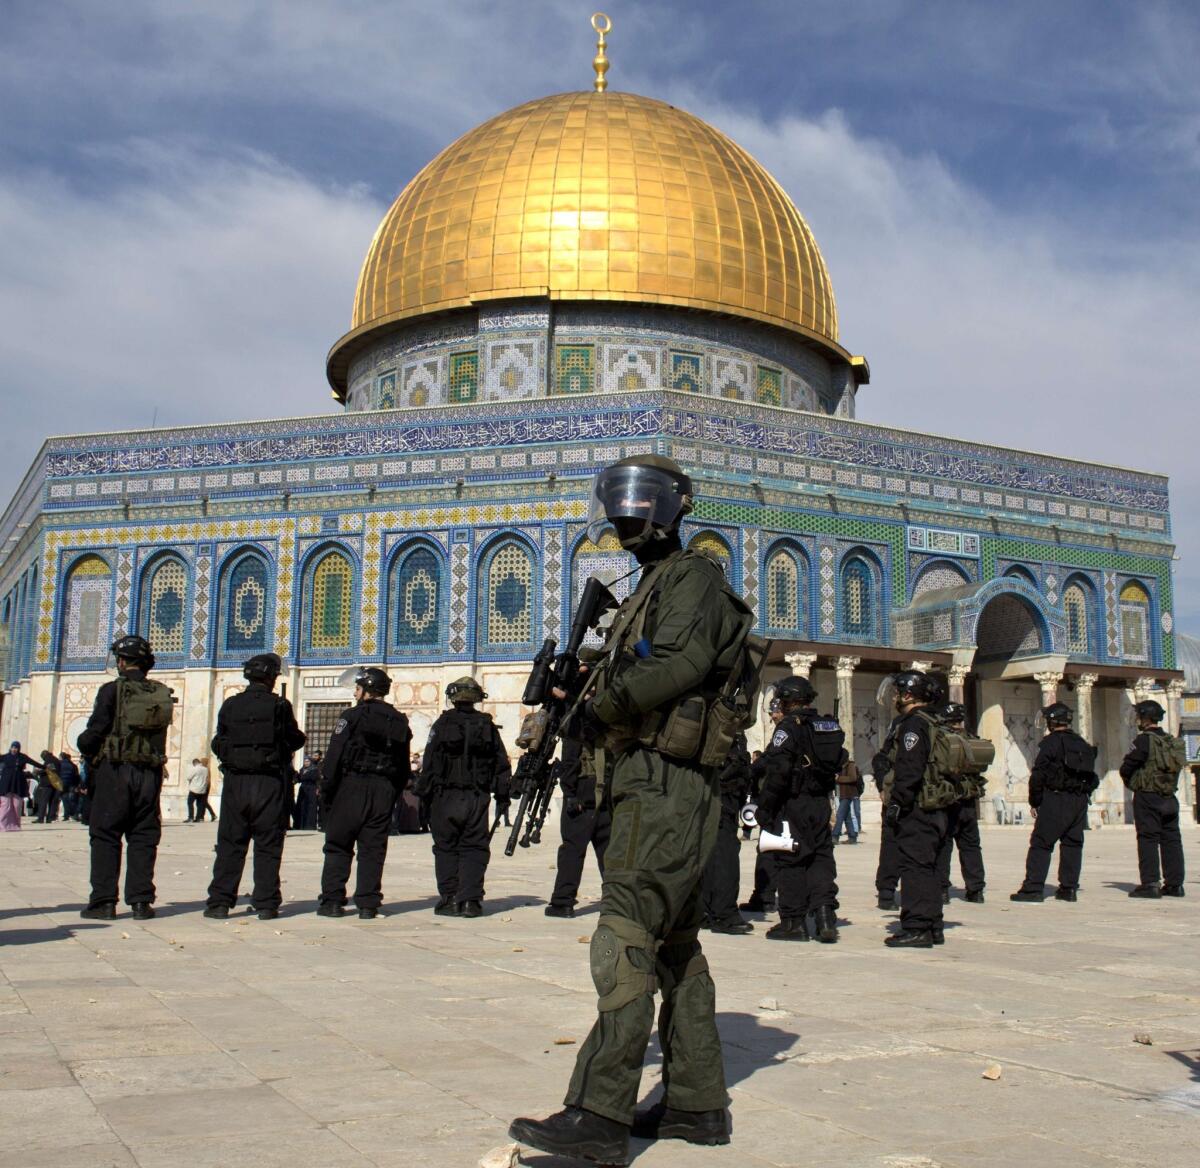 Israeli riot police stand outside the Dome of the Rock mosque in Jerusalem during clashes with Palestinian stone-throwers following midday prayers.